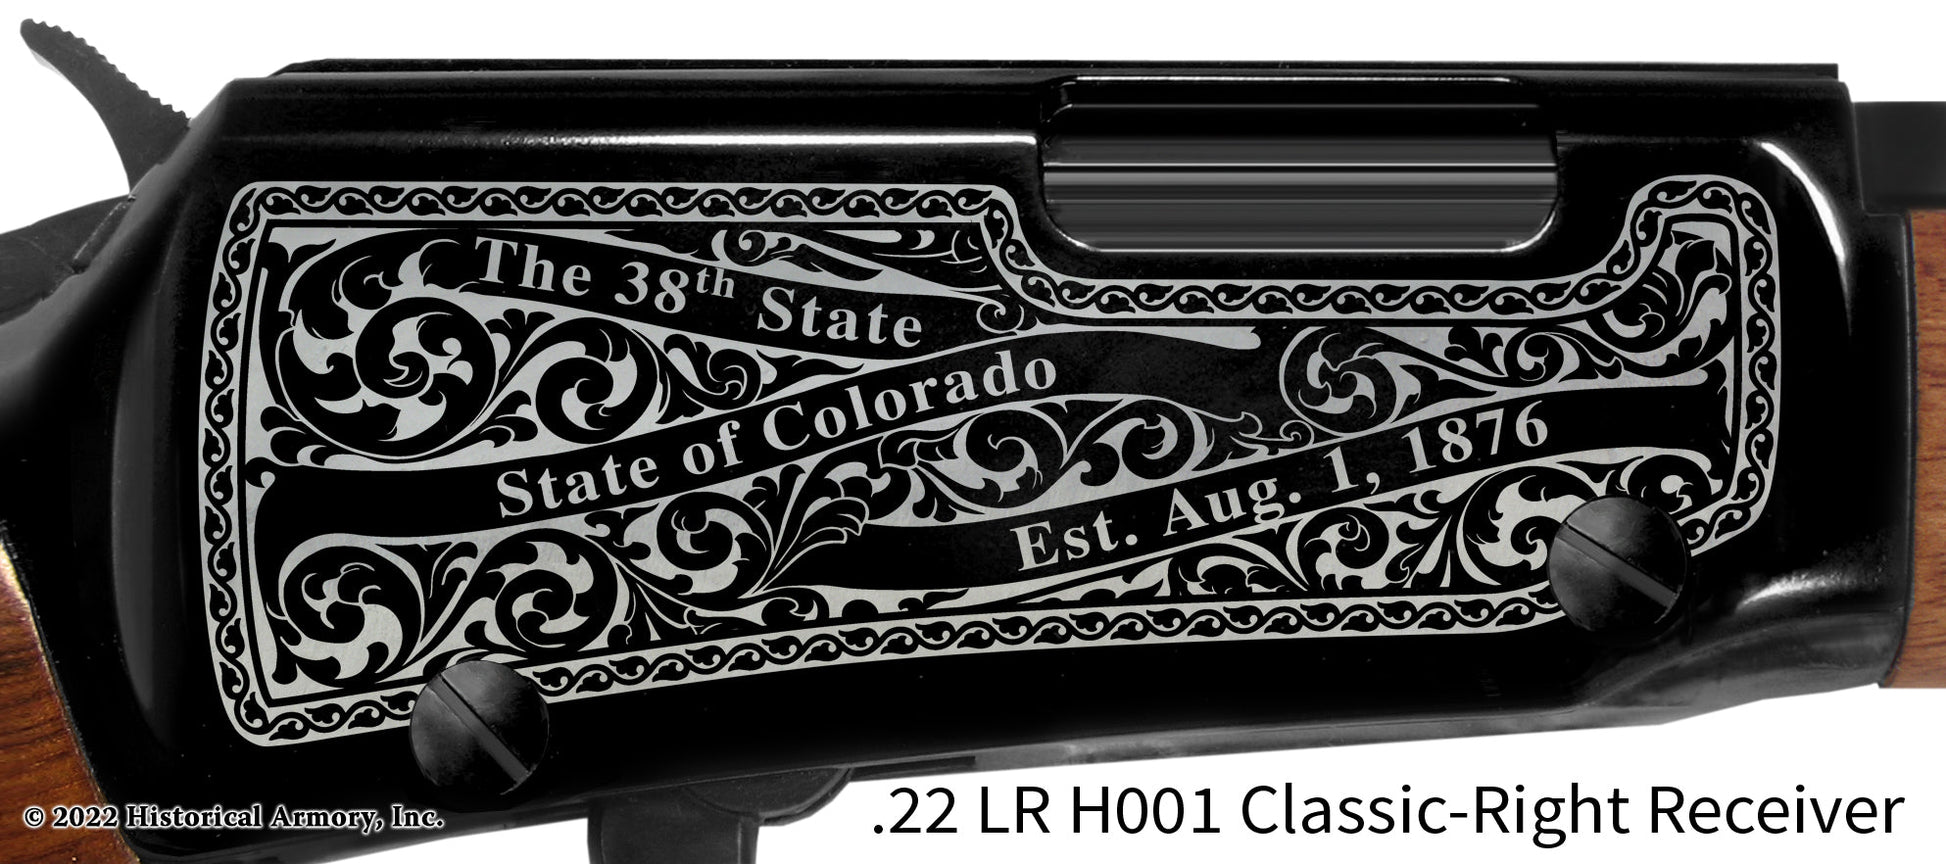 Chaffee County Colorado Engraved Henry H001 Rifle